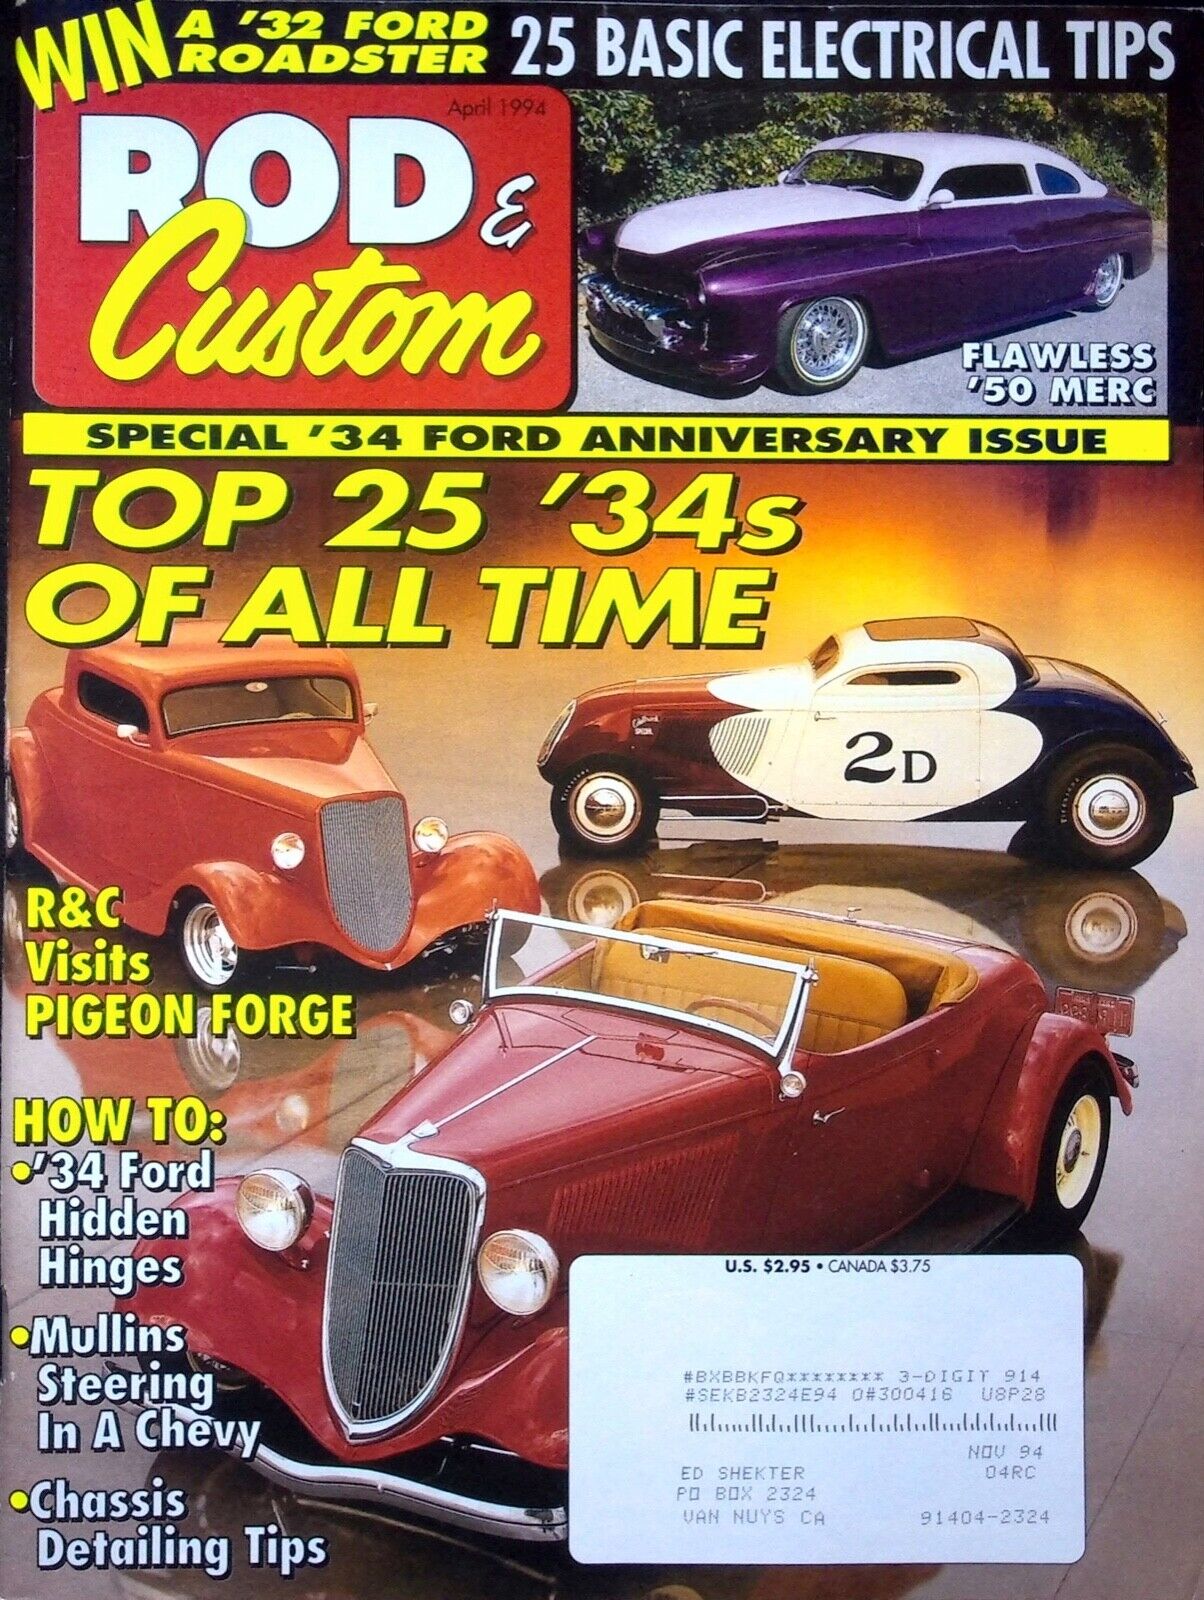 TOP 25 '34S OF ALL TIME - ROD & CUSTOM MAGAZINE, APRIL 1994 VOLUME 28, NUMBER 4